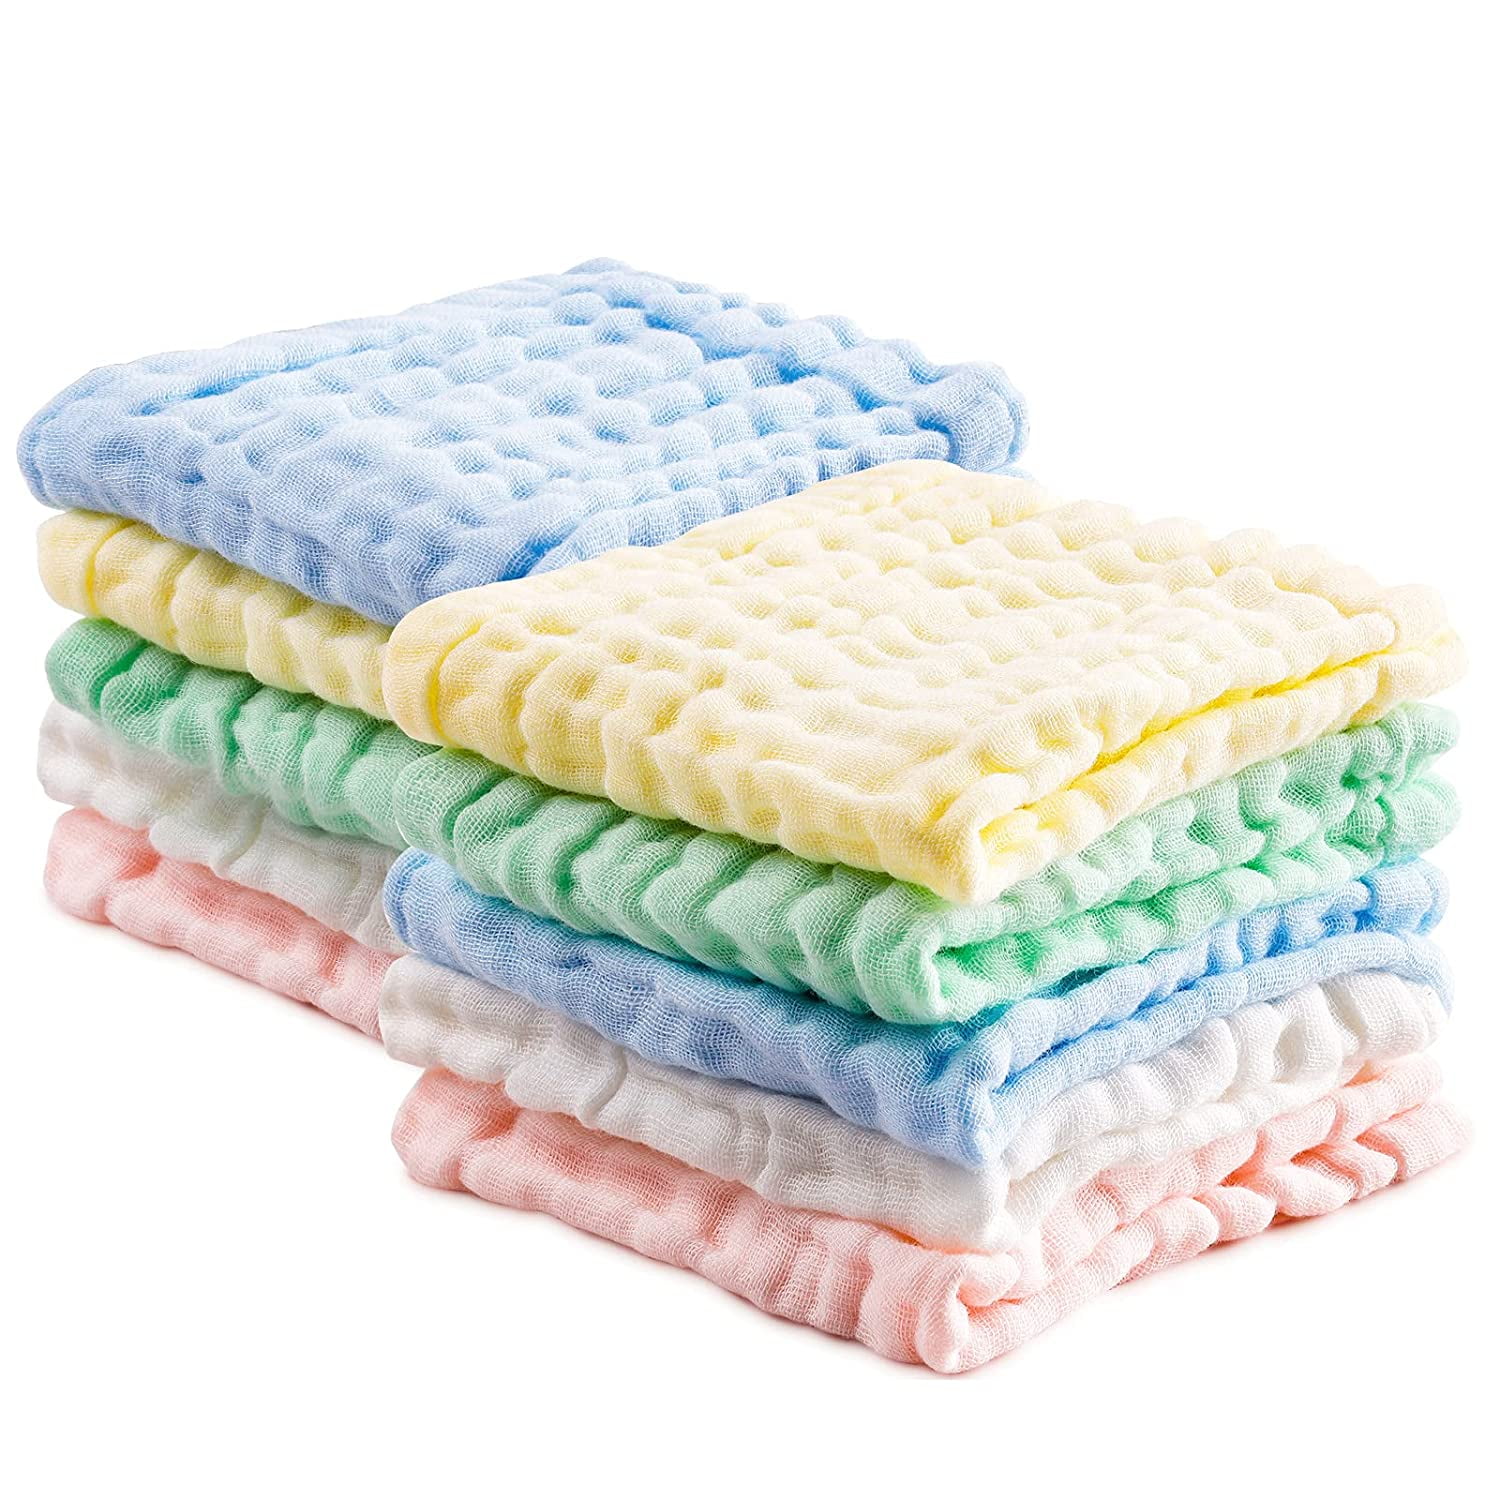 100% Cotton 12-Layer Super Absorbent Washcloths 6 Pack 6 x 18 inches Bath Towel Viviland Baby Muslin Burp Cloths Great Shower Gift 